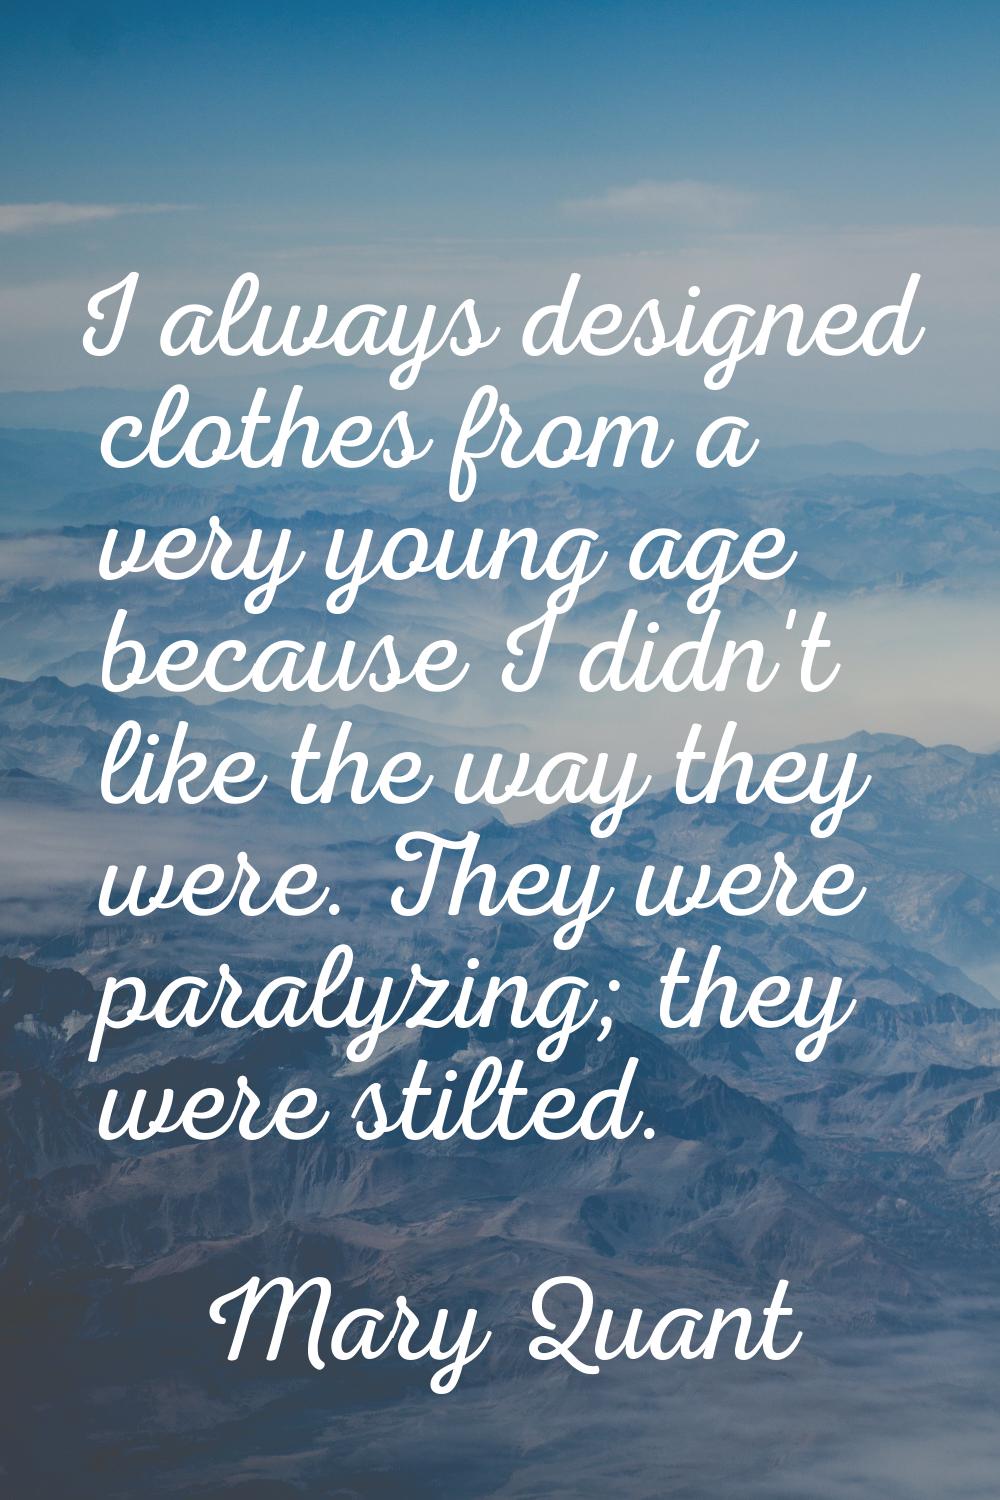 I always designed clothes from a very young age because I didn't like the way they were. They were 